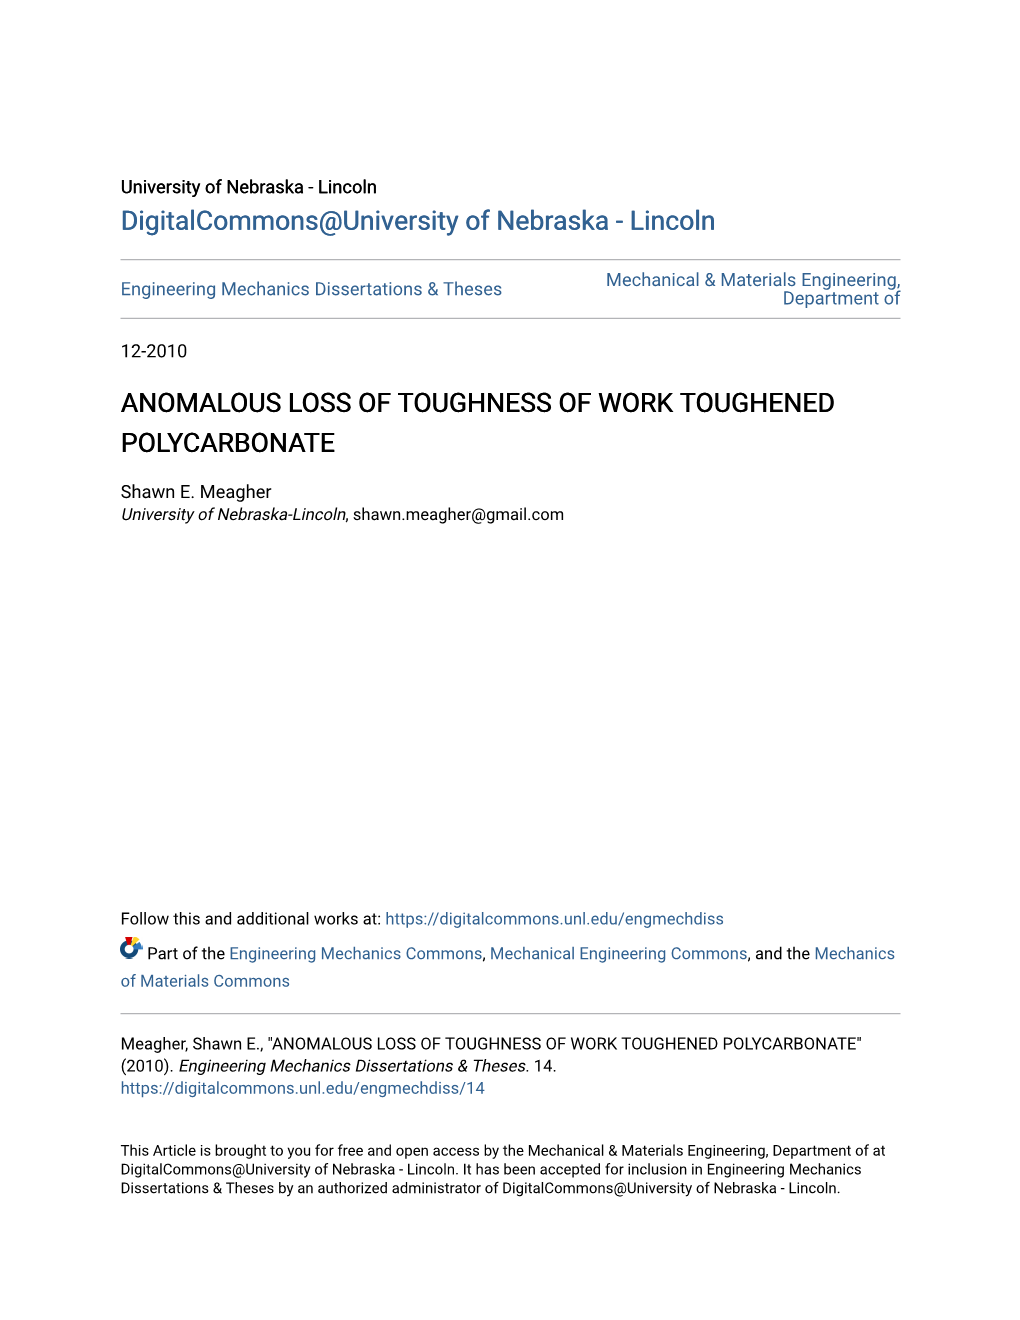 Anomalous Loss of Toughness of Work Toughened Polycarbonate